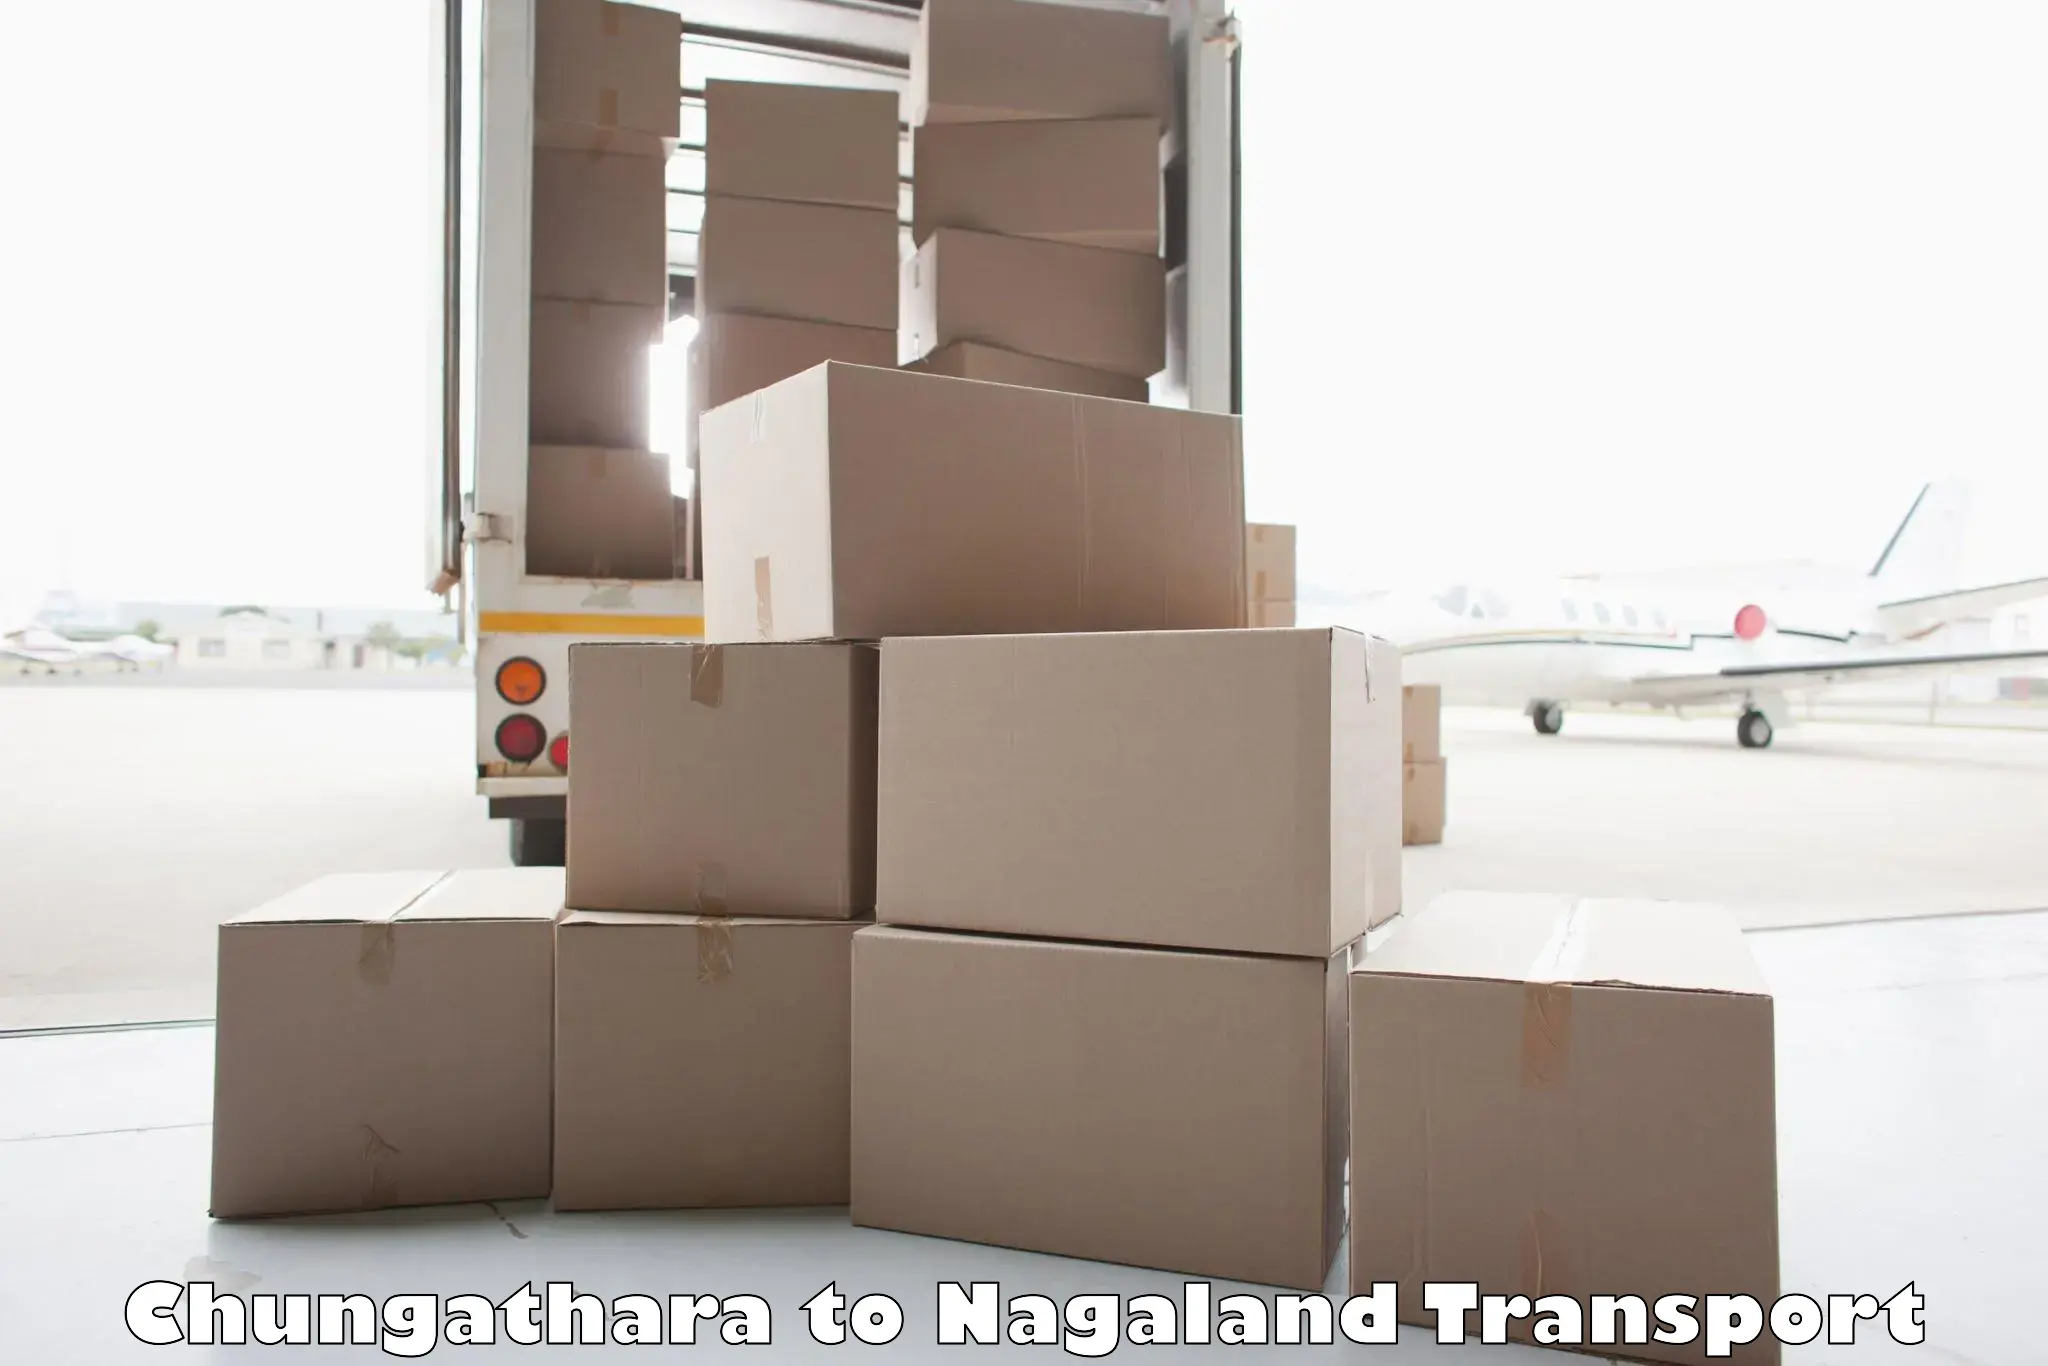 Parcel transport services Chungathara to Mon